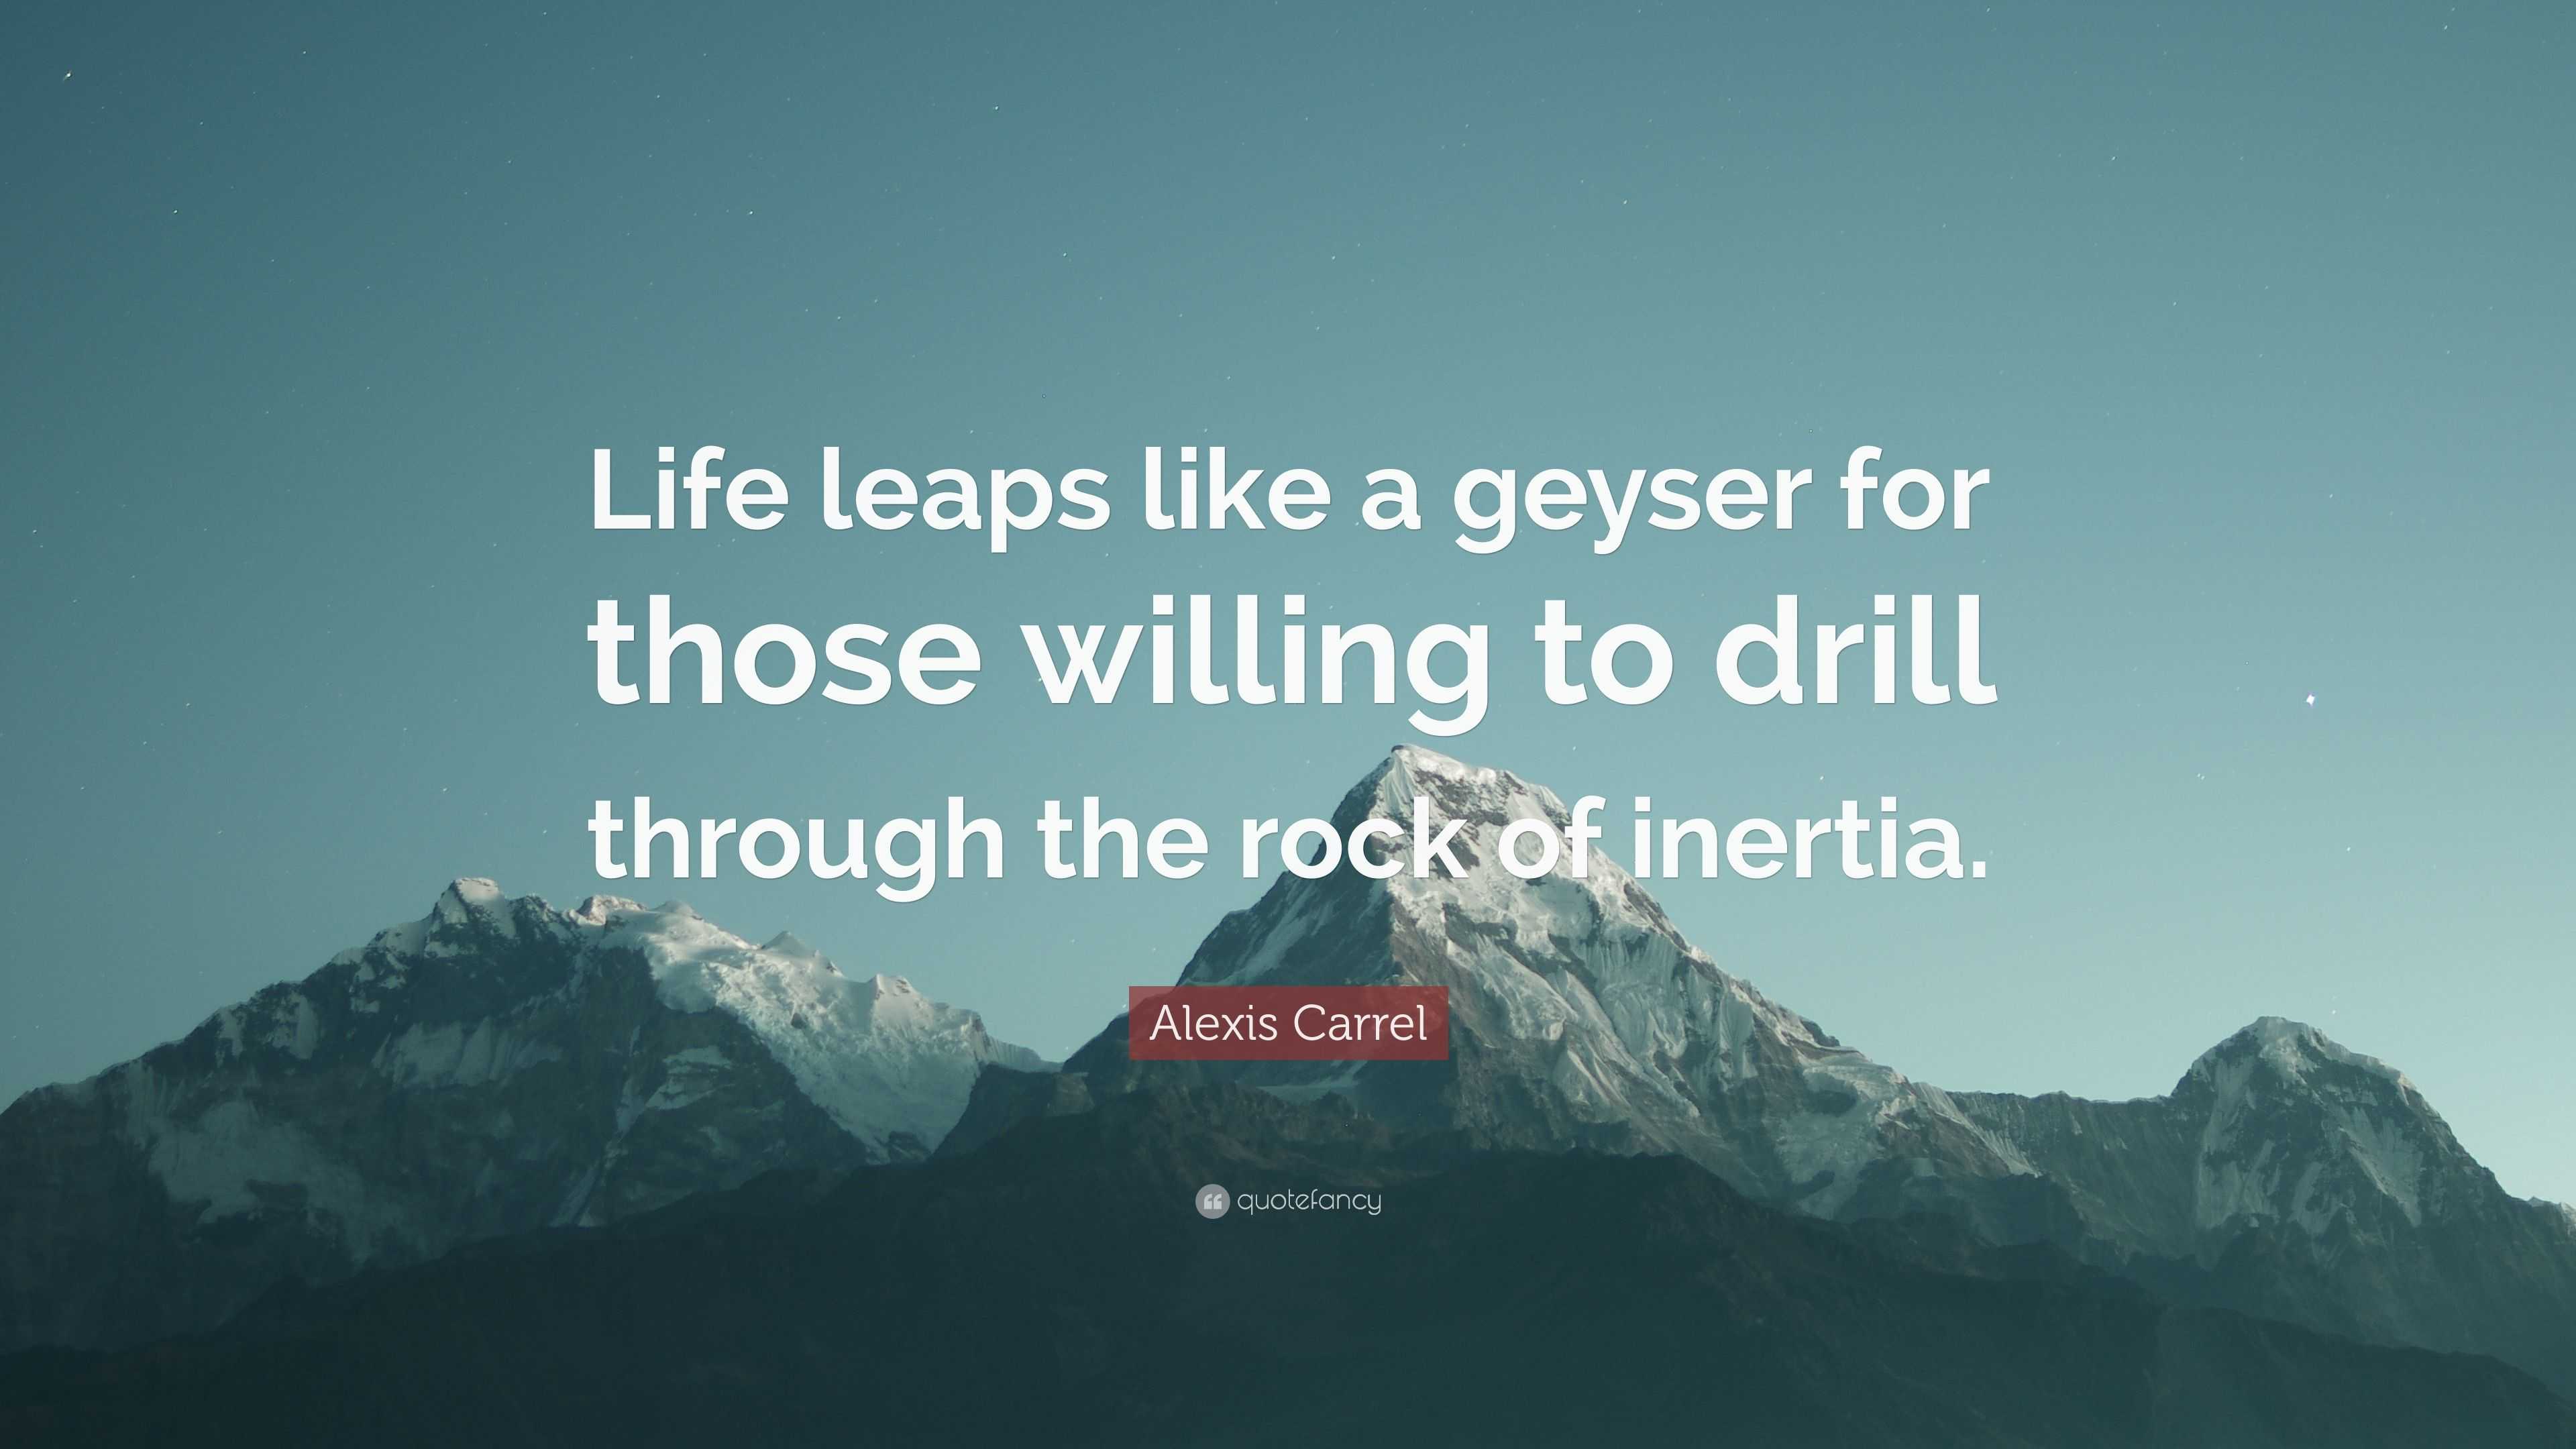 Alexis Carrel Quote “Life leaps like a geyser for those willing to drill through